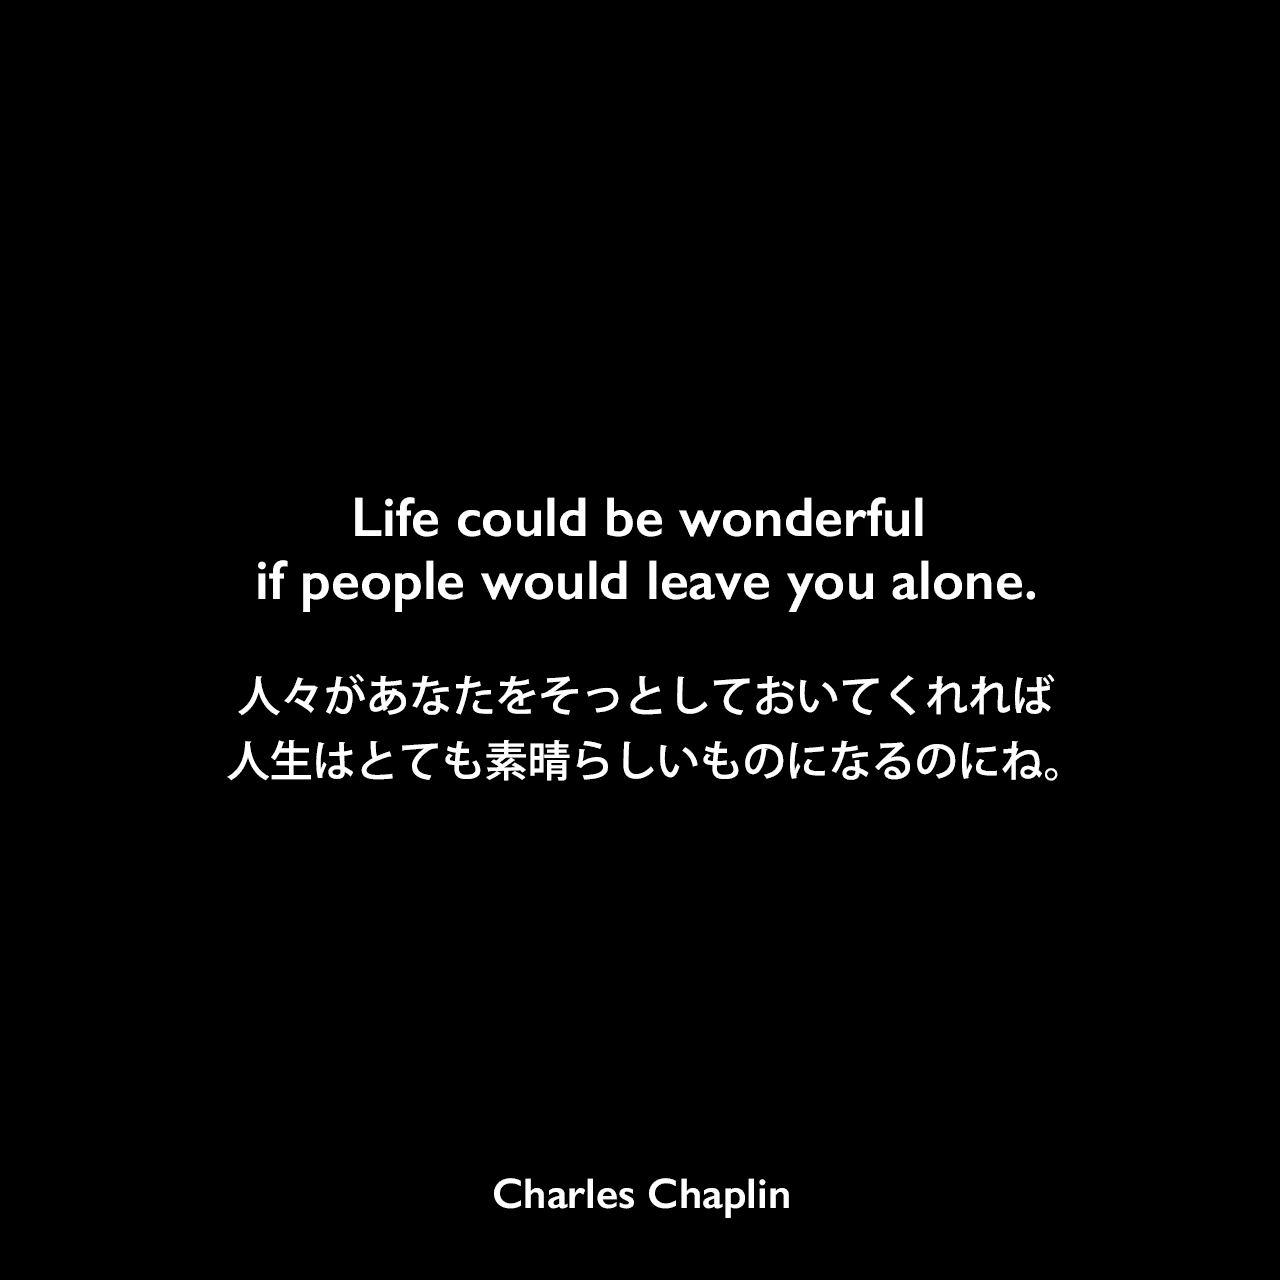 Life could be wonderful if people would leave you alone.人々があなたをそっとしておいてくれれば、人生はとても素晴らしいものになるのにね。Charles Chaplin